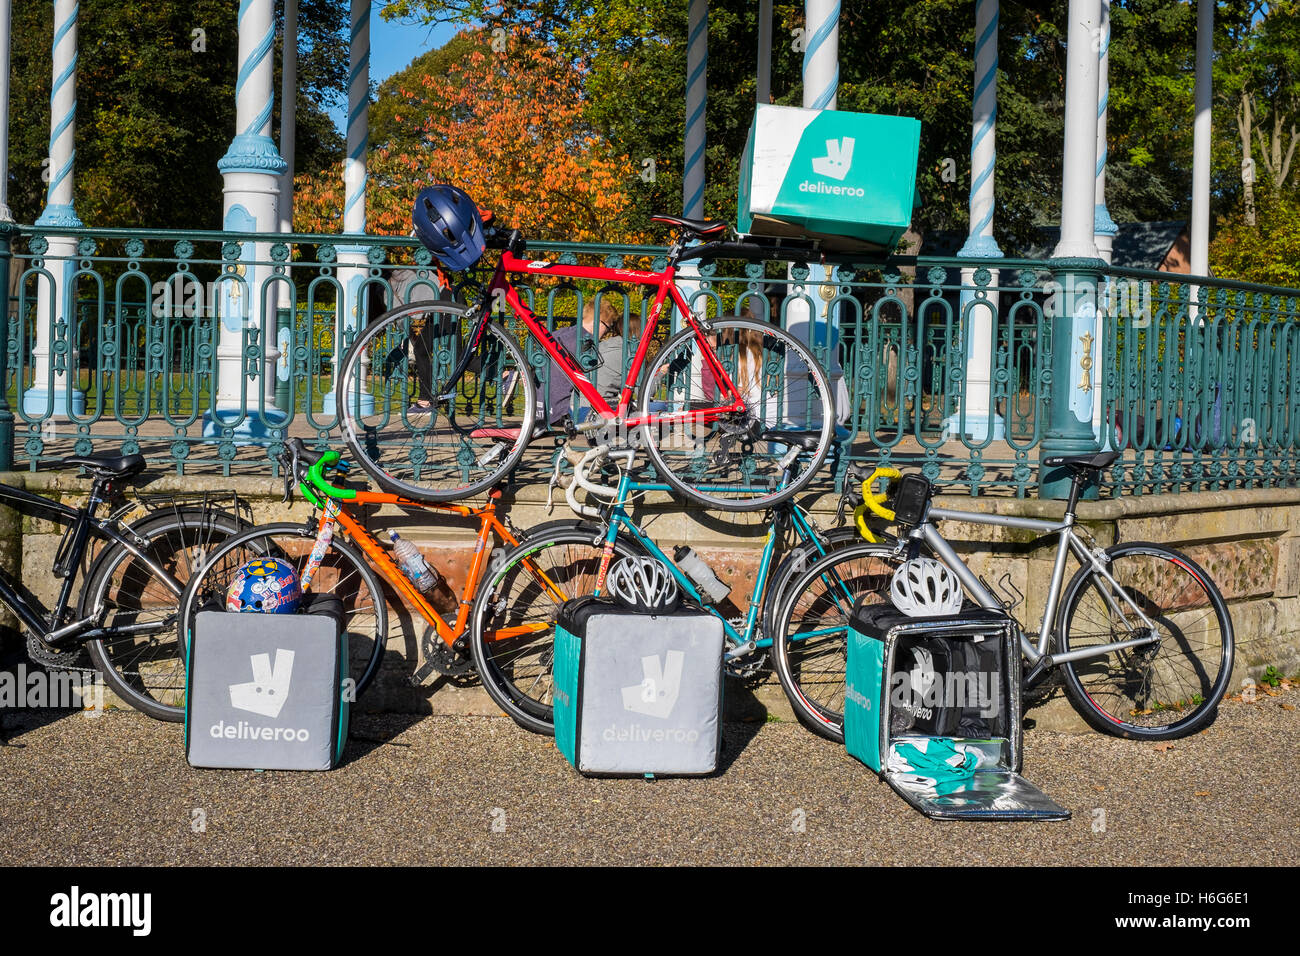 Deliveroo delivery bikes lined up in the Quarry, Shrewsbury, Shropshire, UK Stock Photo